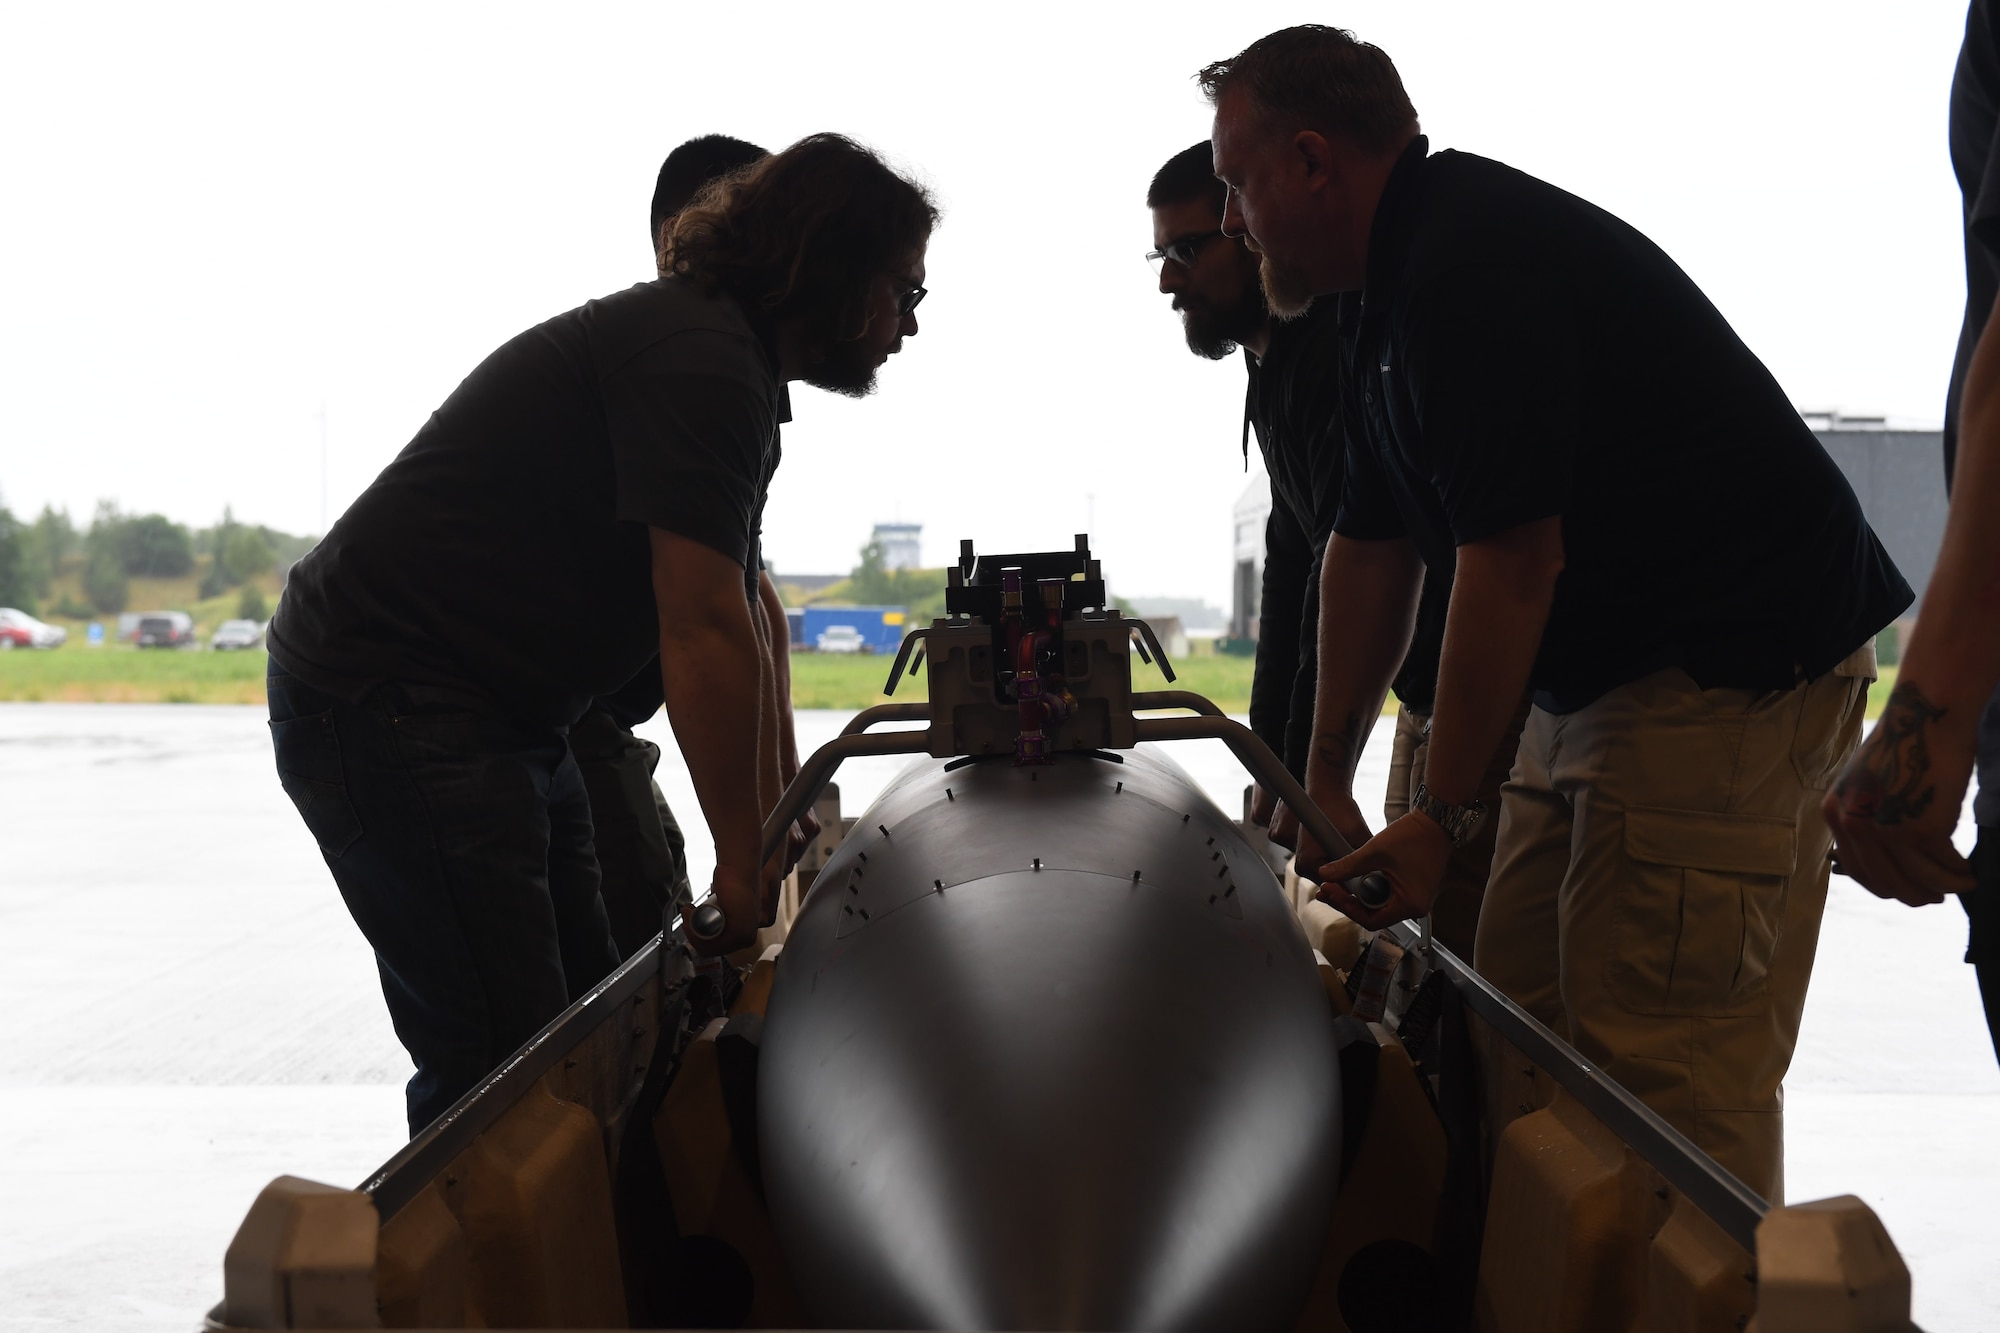 General Atomic aircraft maintenance technicians prepare to lift an MQ-9 Reaper fuel tank at Amari Air Base, Estonia, June 30, 2020. One of the aircraft was transported via cargo truck from Miroslawiec AB, where it was then offloaded and assembled in a hangar at Amari. (U.S. Air Force photo by Airman 1st Class Alison Stewart)